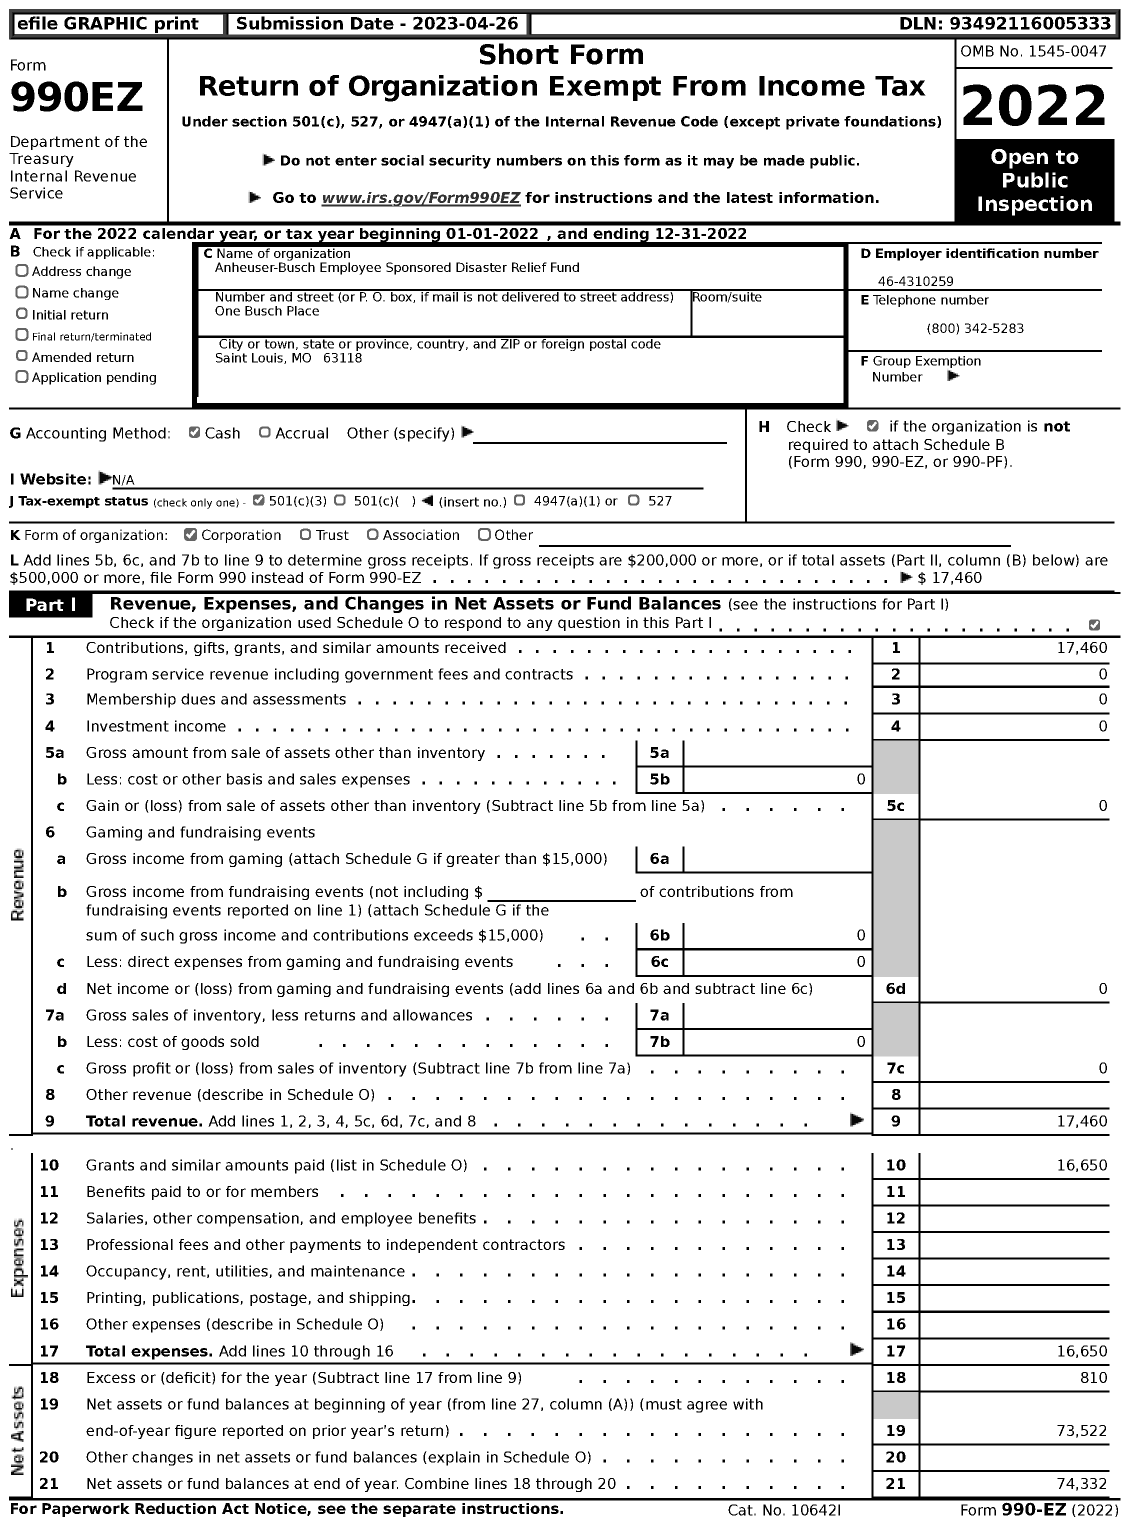 Image of first page of 2022 Form 990EZ for Anheuser-Busch Employee Sponsored Disaster Relief Fund